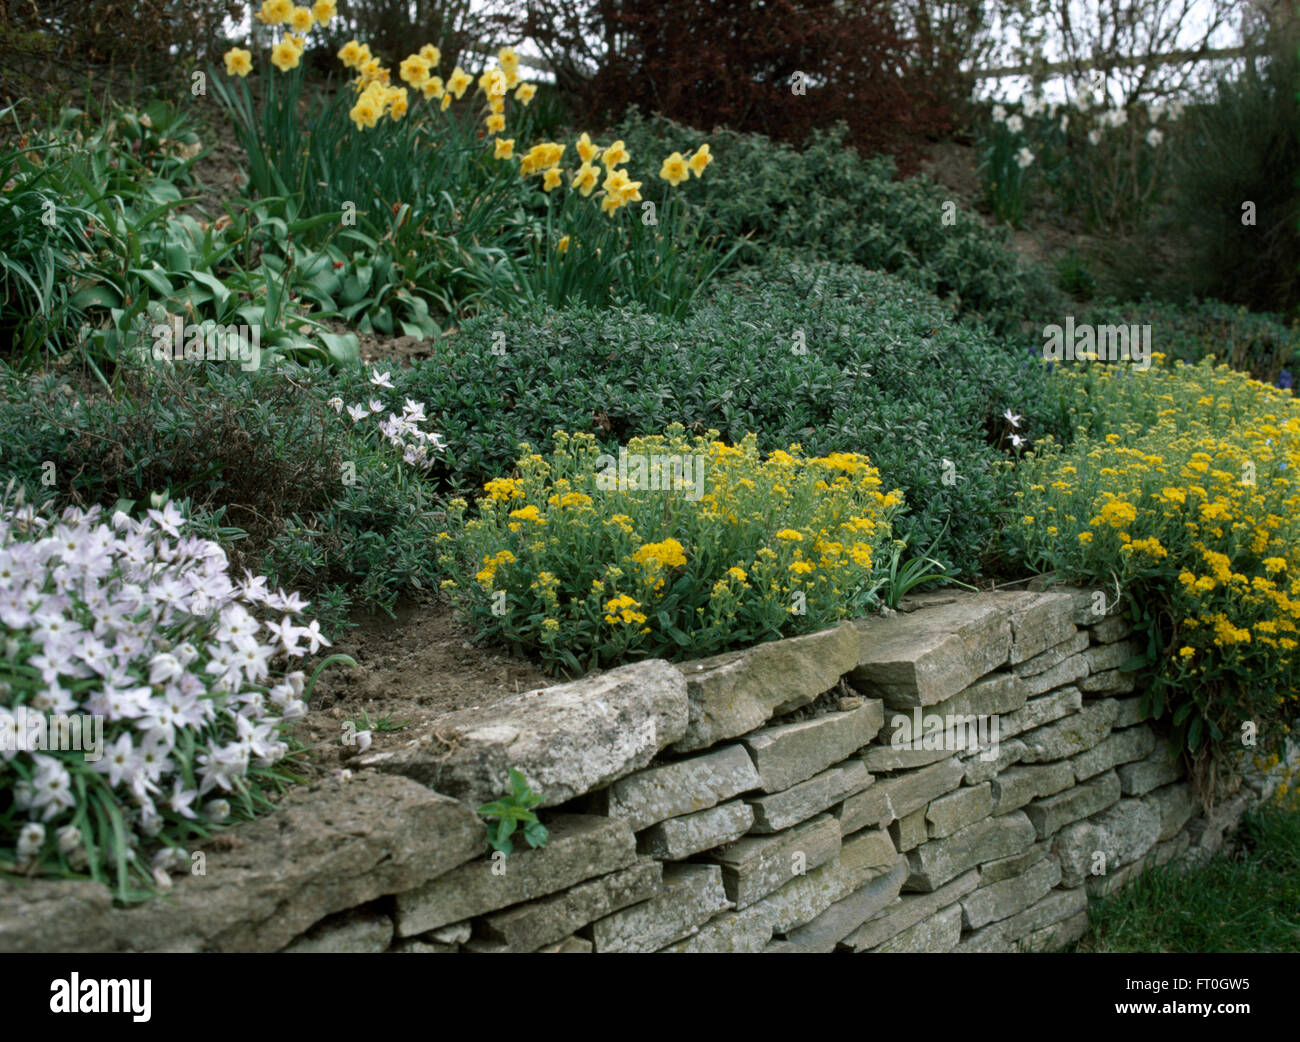 Ipheion uniflorum and yellow saxifrage with daffodils in a sloping border above a low dry stone wall Stock Photo